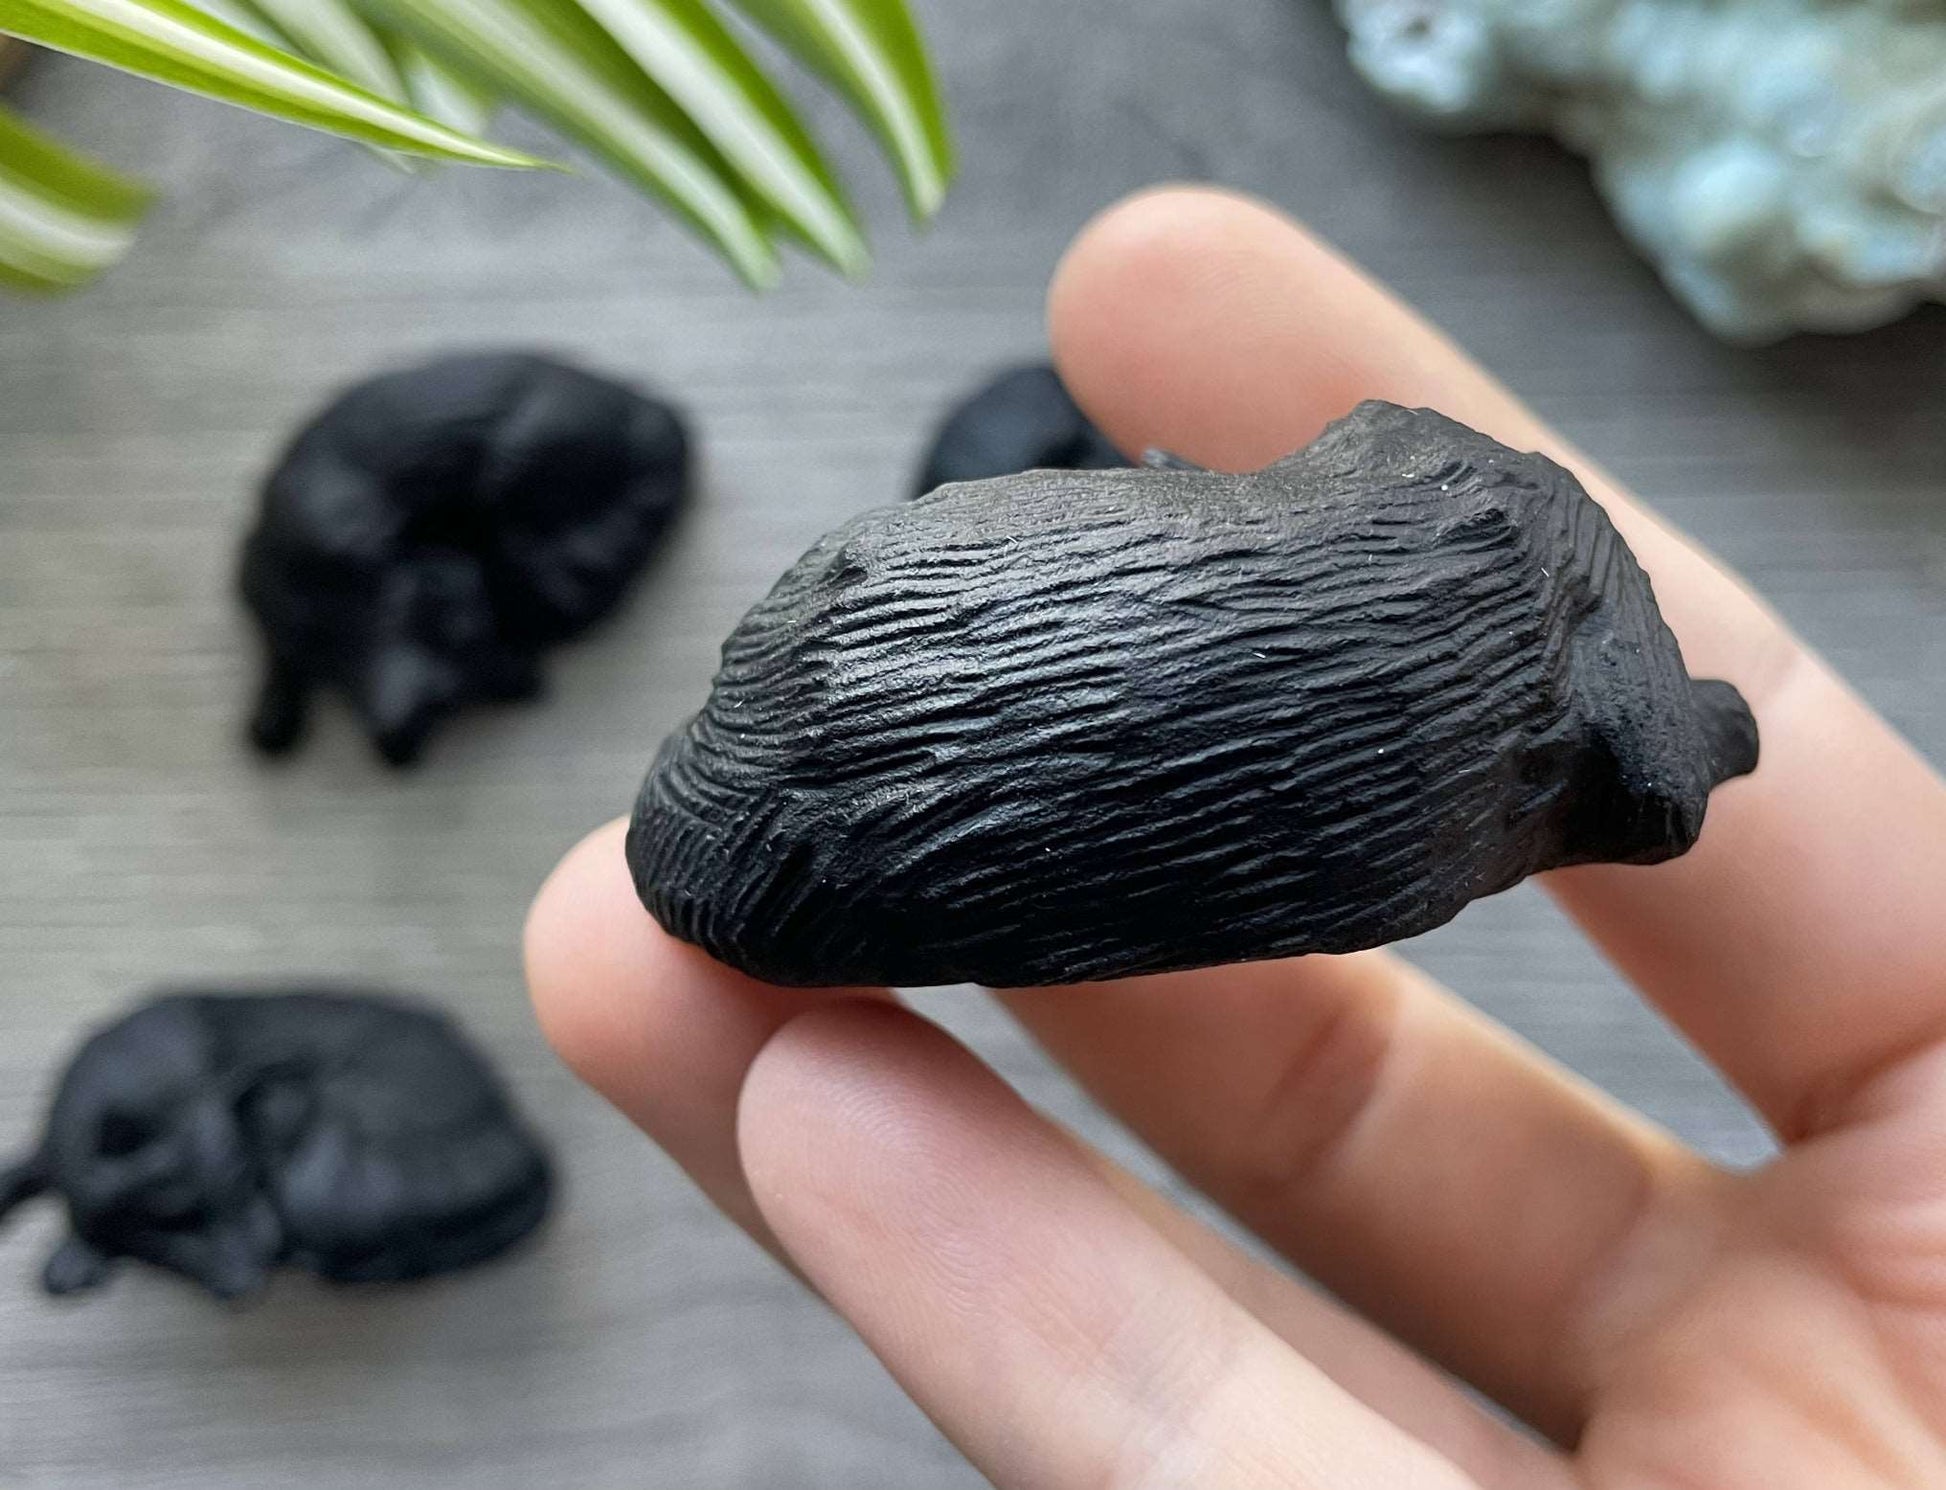 Pictured is a sleeping wolf carved out of black obsidian. Pictured is a sleeping fox carved out of black obsidian.